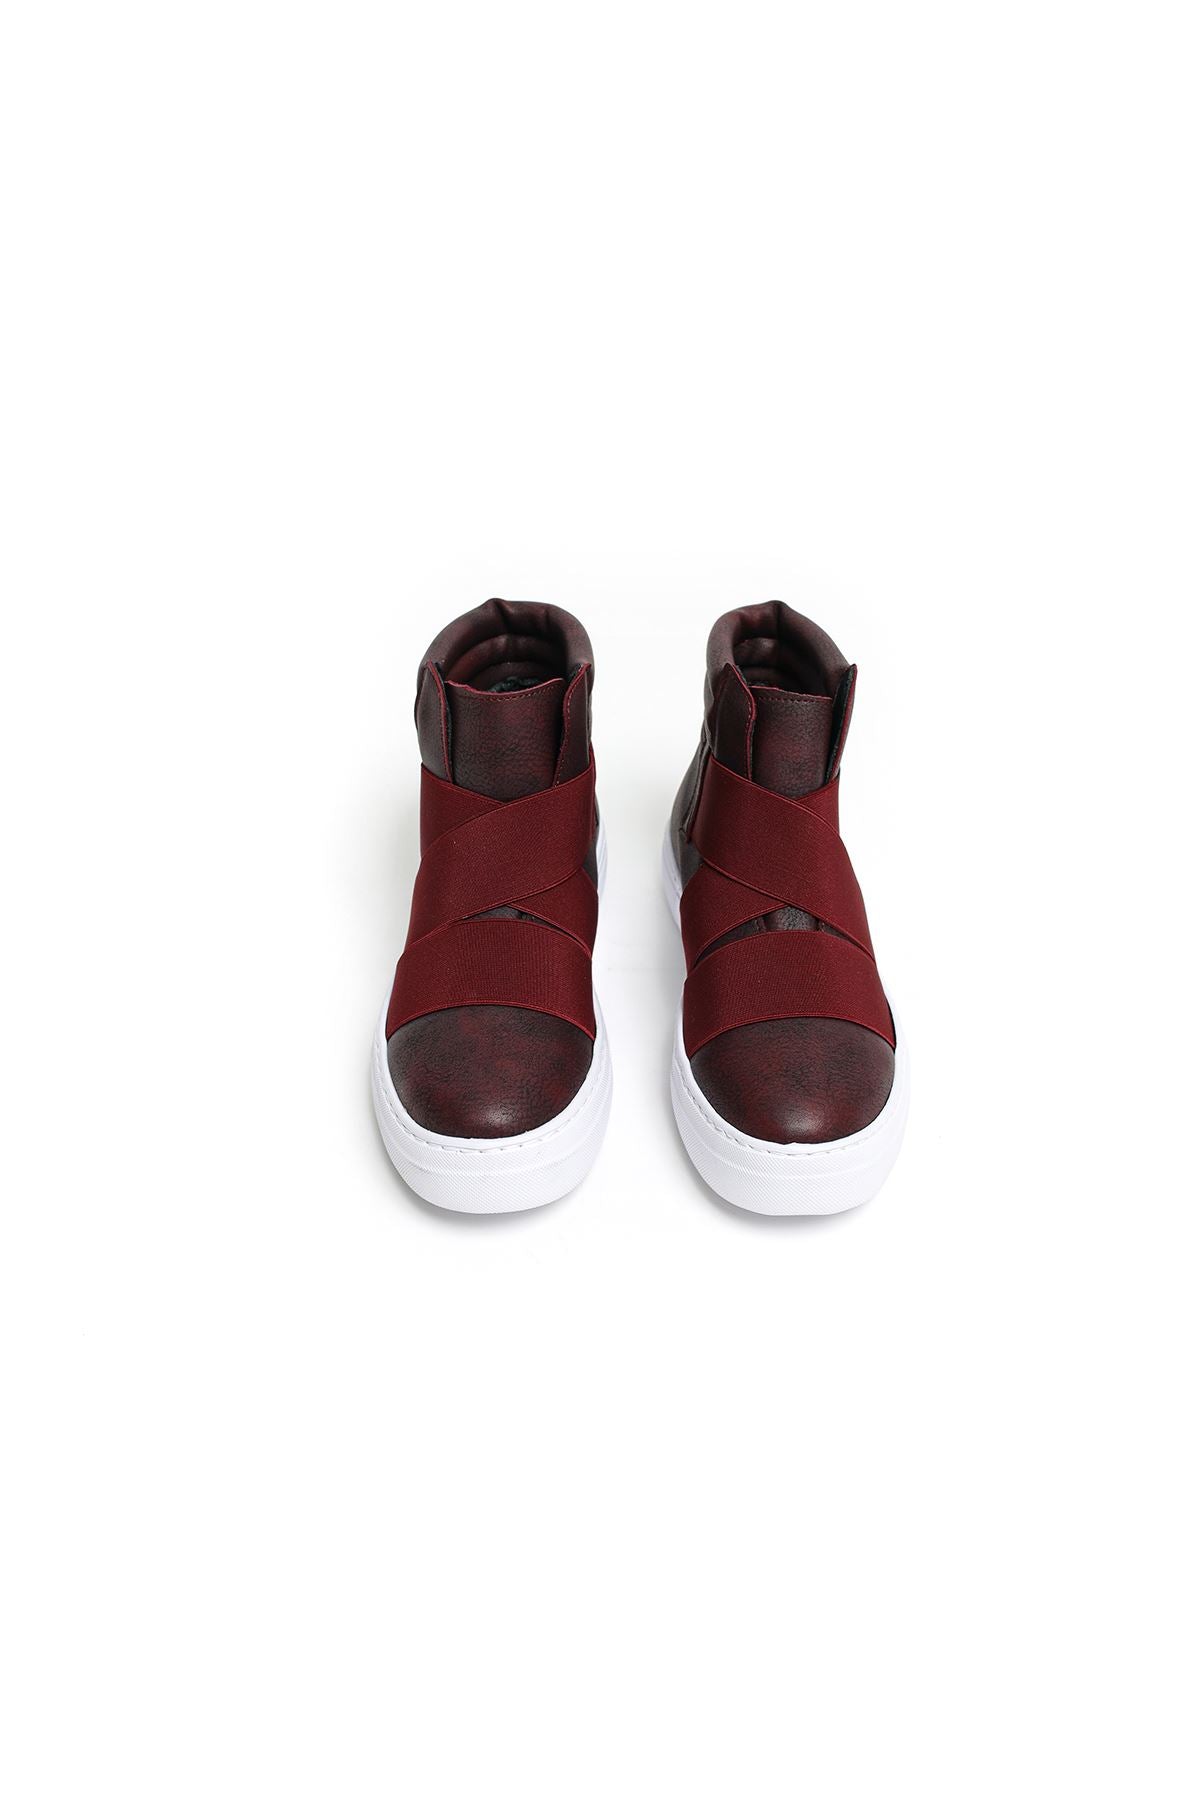 CH023 Men's Banded Red-White Sole Casual Sneaker Boots - STREET MODE ™